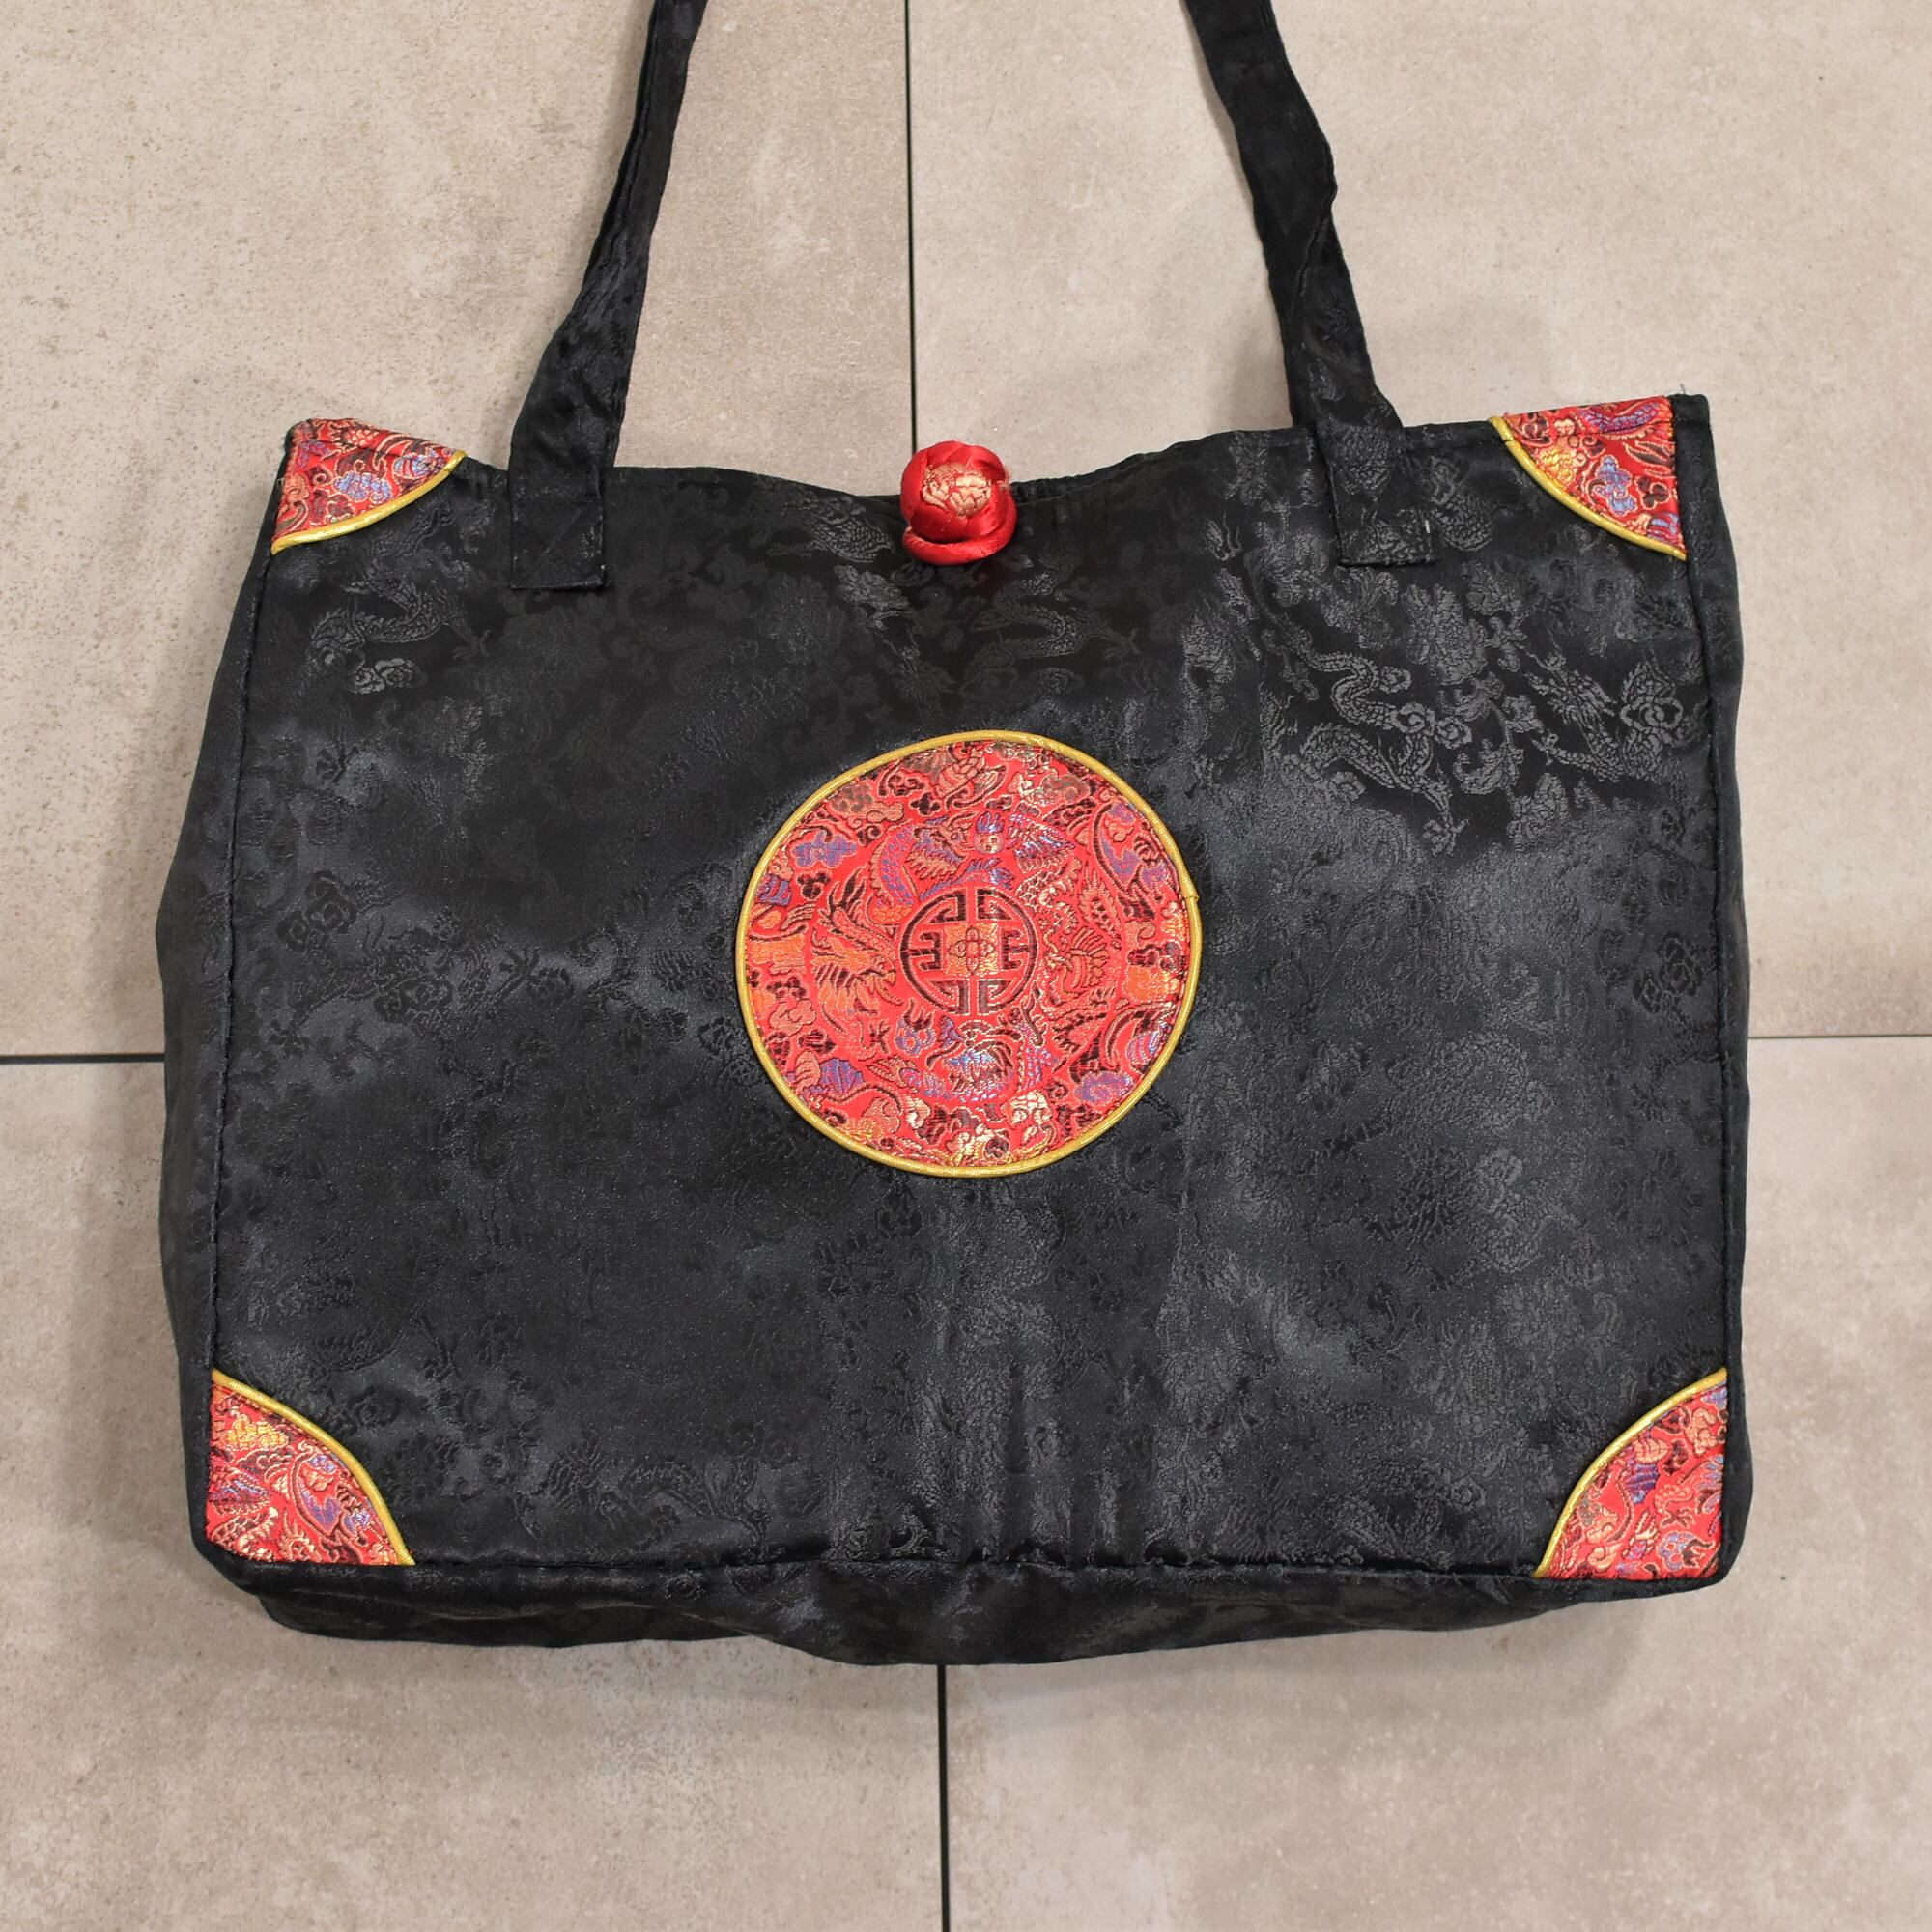 Asian vtg embroidery design china tote bag